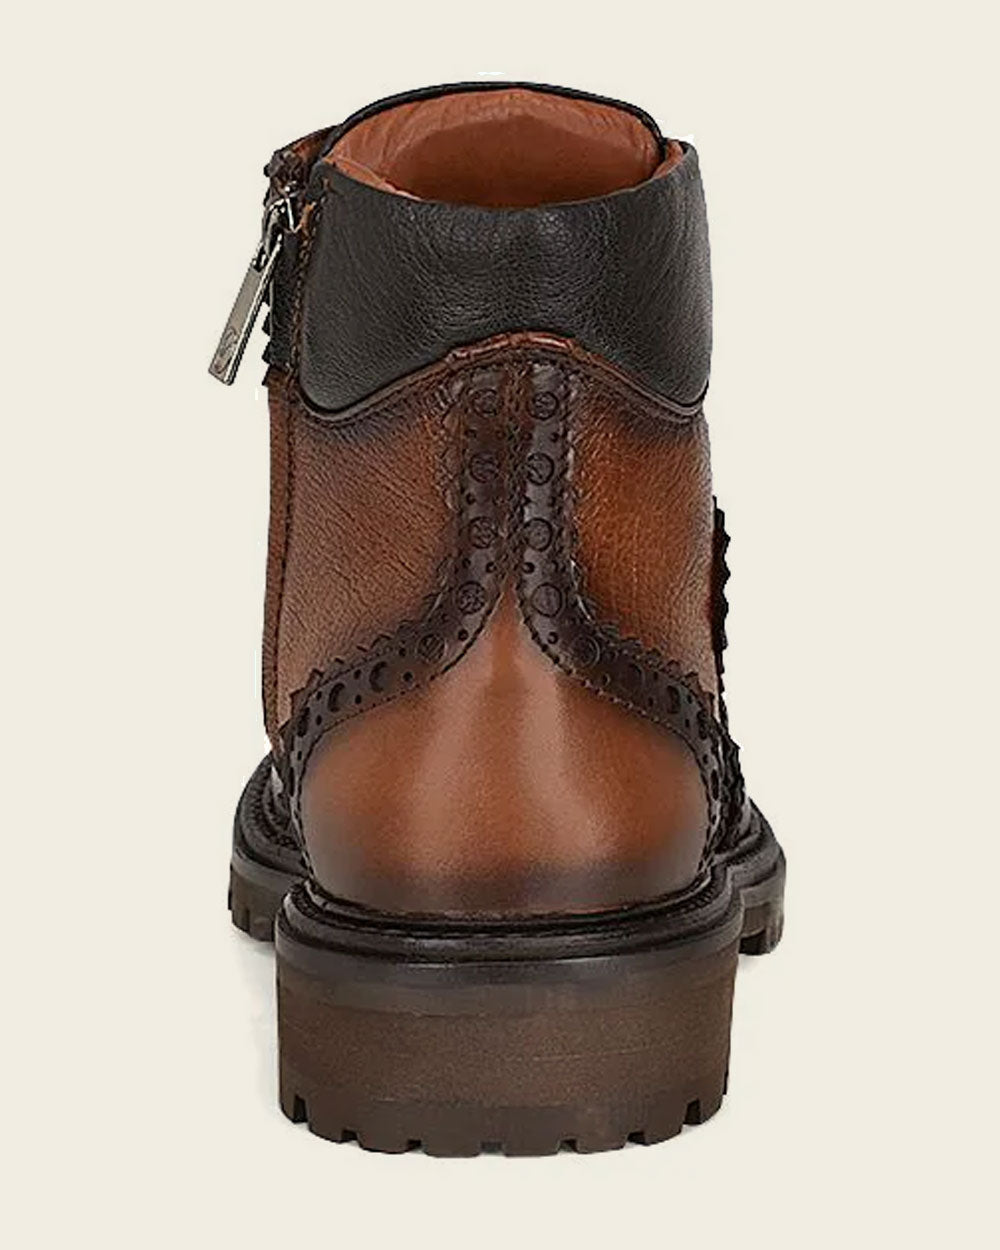 Whether you're stepping out for a casual outing or a formal affair, this versatile boot effortlessly complements any ensemble, making it a wardrobe staple for the modern gentleman.